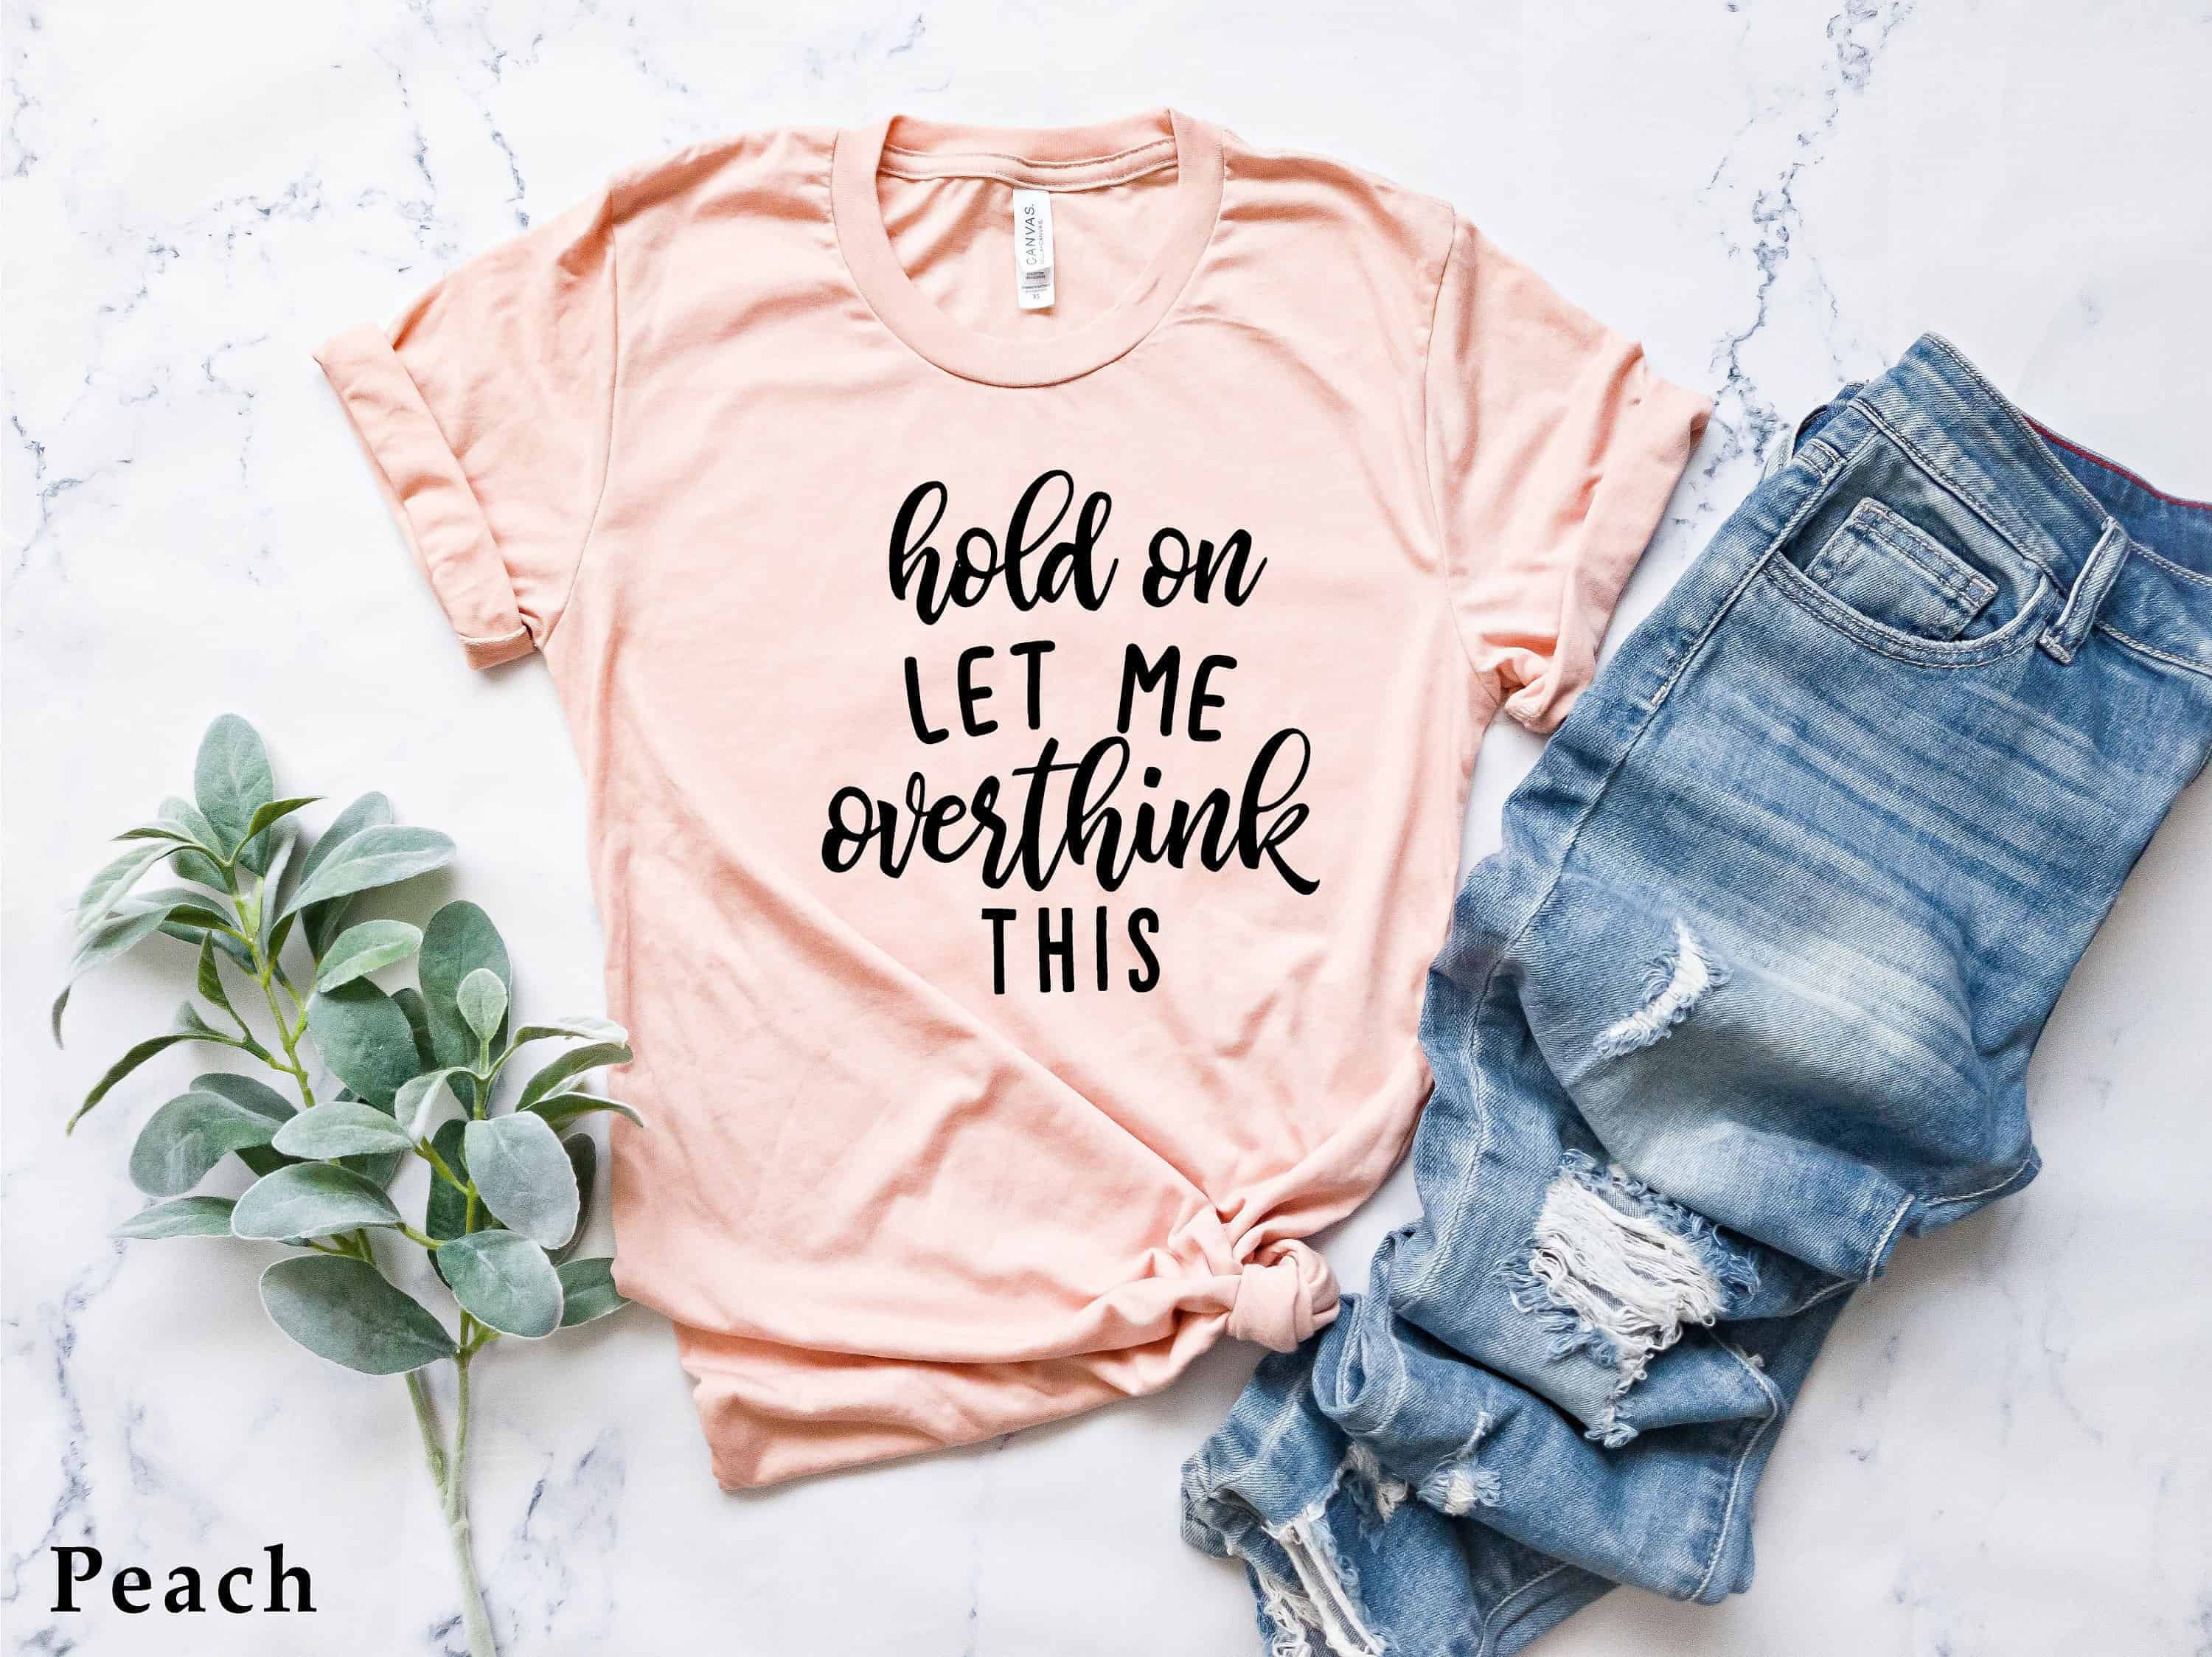 Hold On Let Me Overthink This  Funny Women's Tshirts  Unisex Tshirt  Women's Graphic Tee  Quote Shirt  Funny Shirts  Mom Shirt